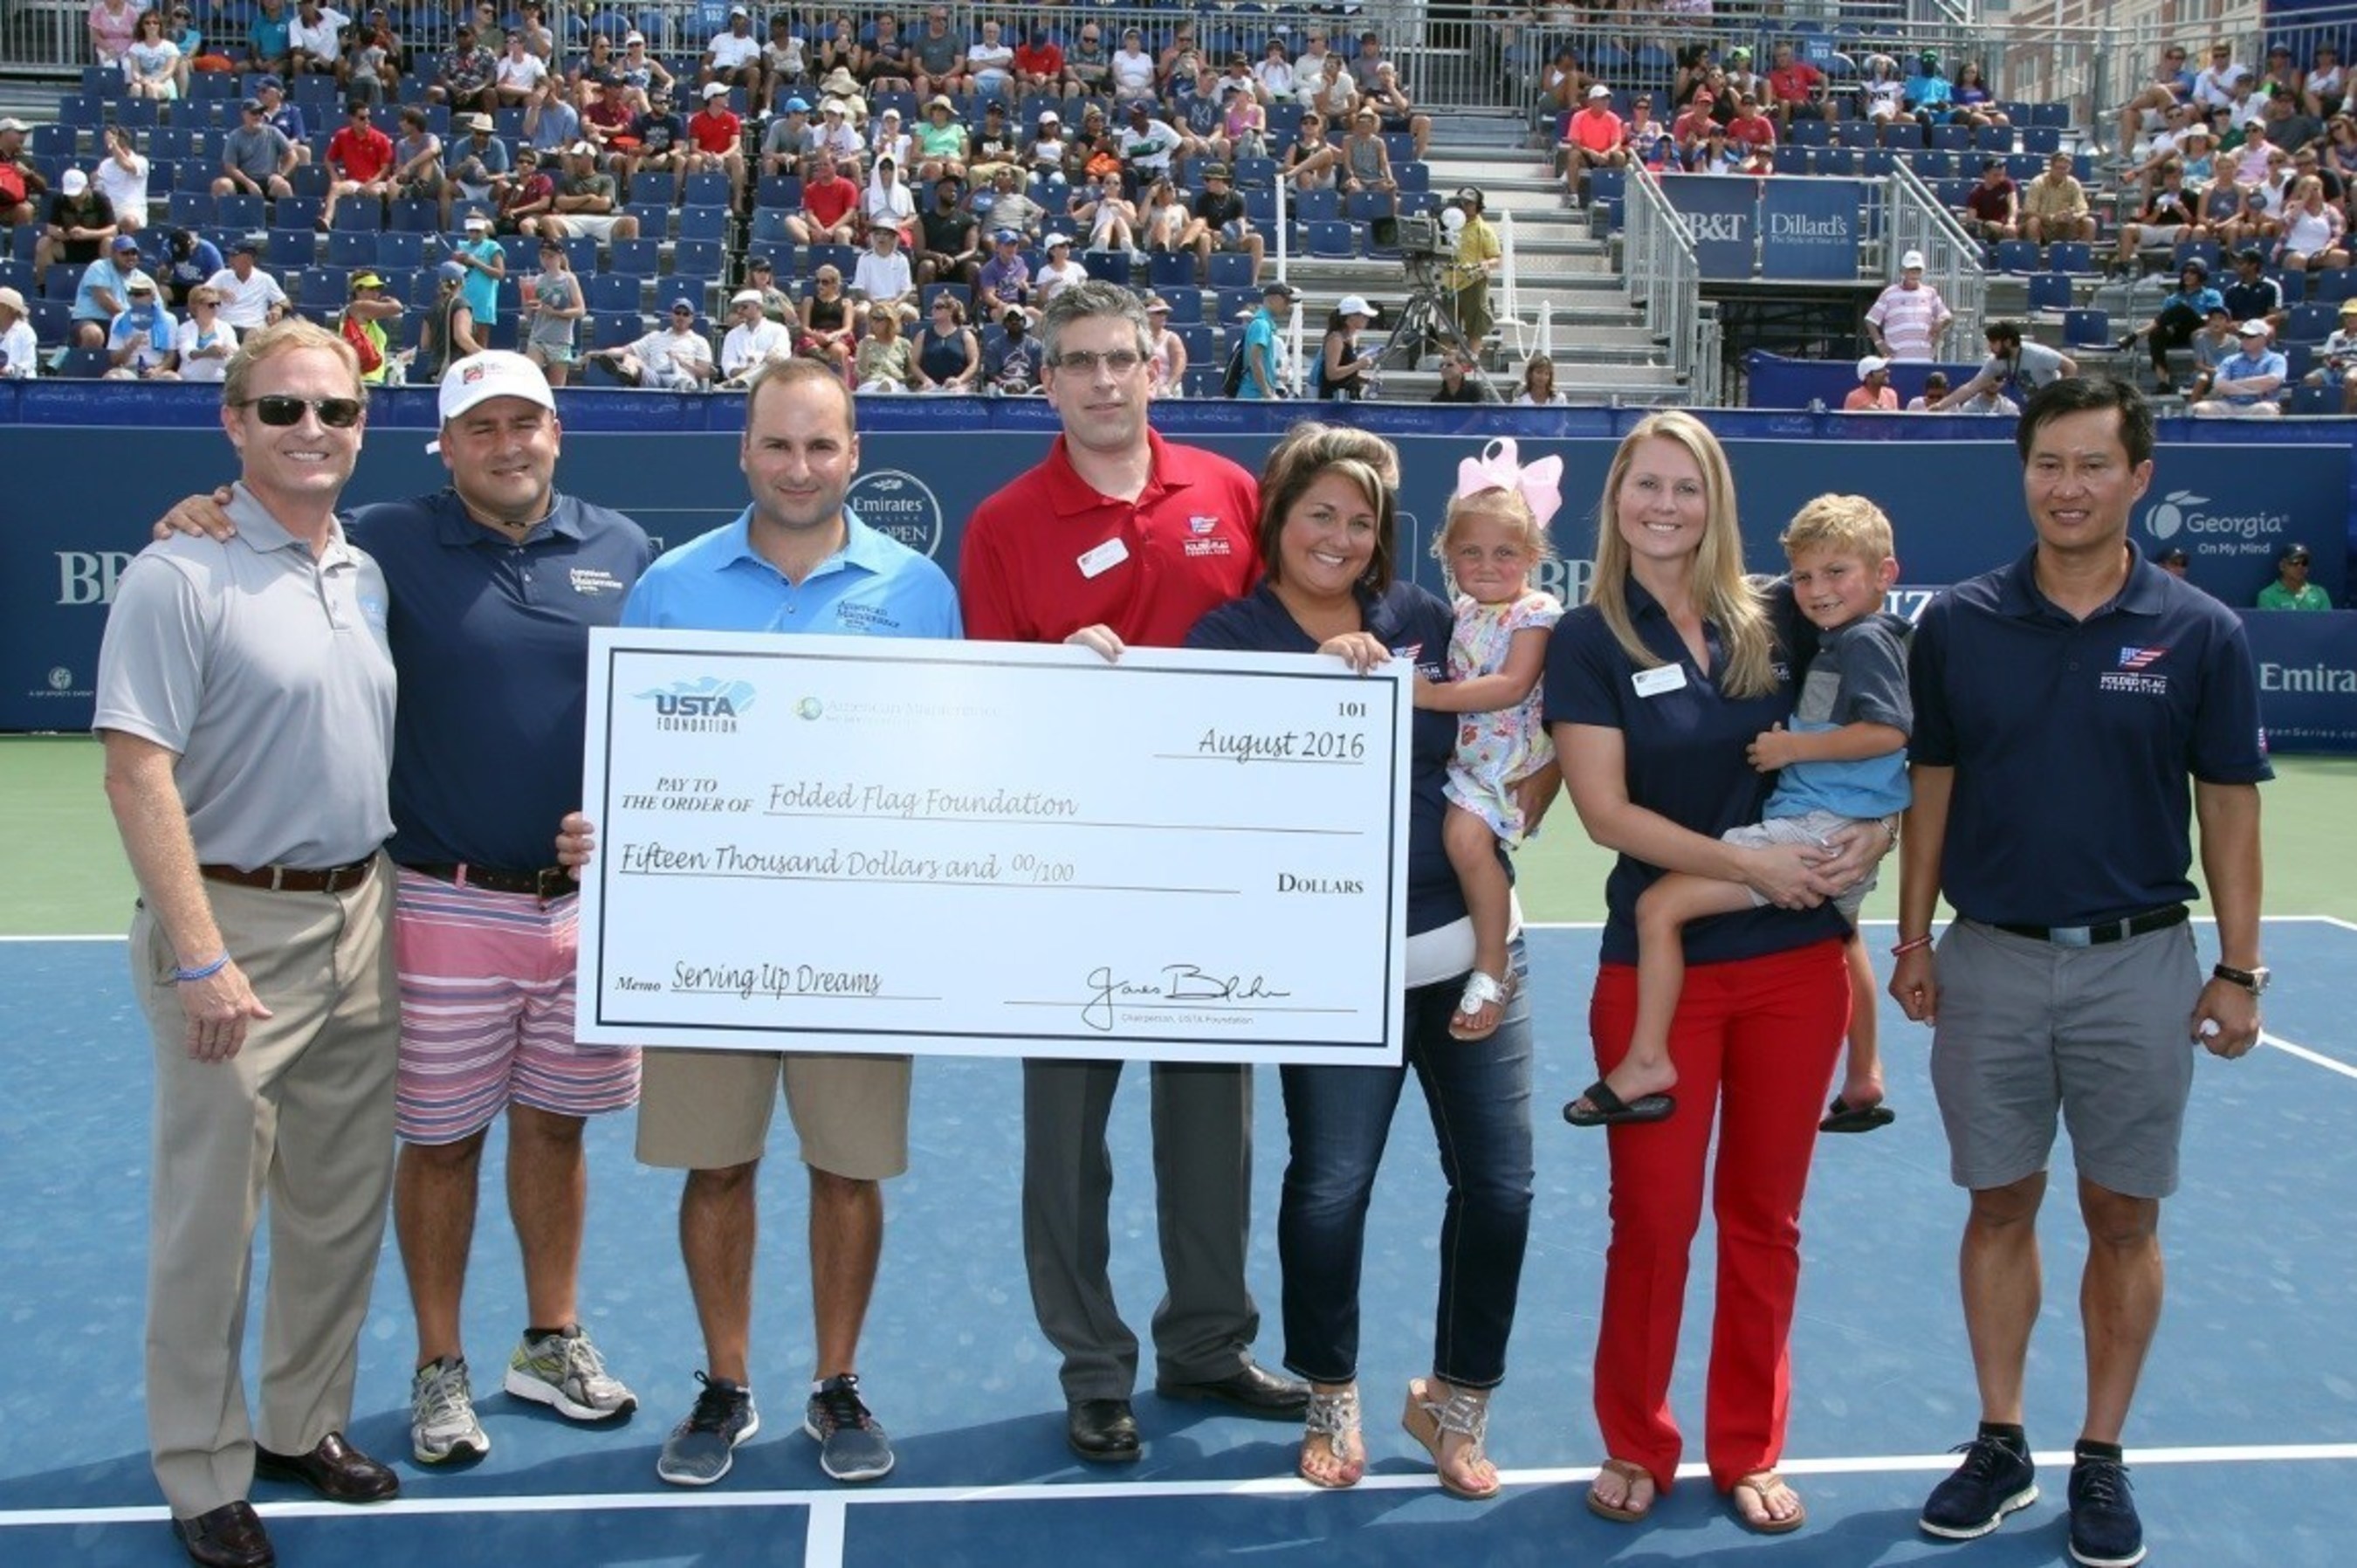 USTA Foundation President Dan Faber (L) meets John Coogan (C), Executive Director of The Folded Flag Foundation, and Peter Brual (R), Folded Flag Foundation Trustee, to present the $15,000 donation.